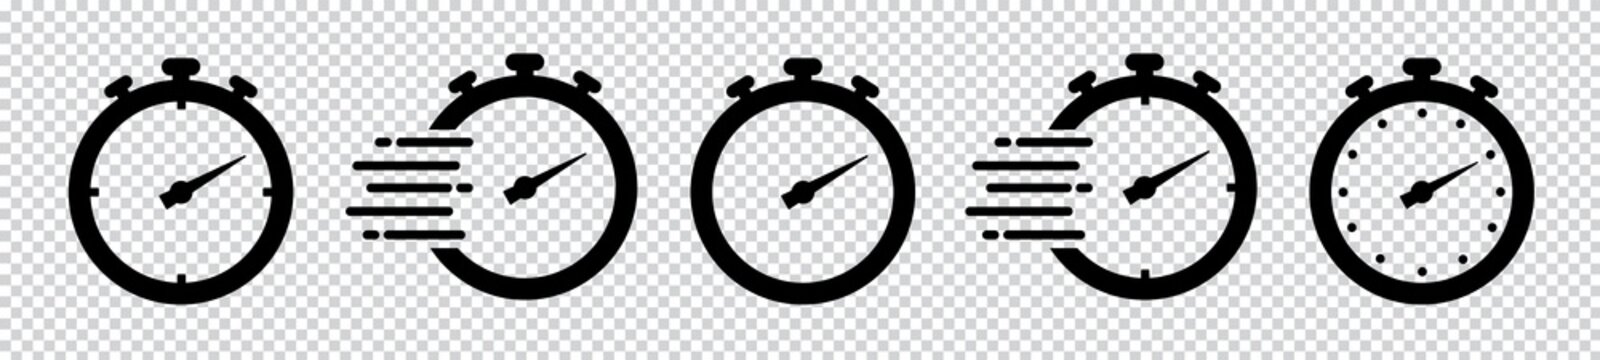 Timers Icon Vector Illustration